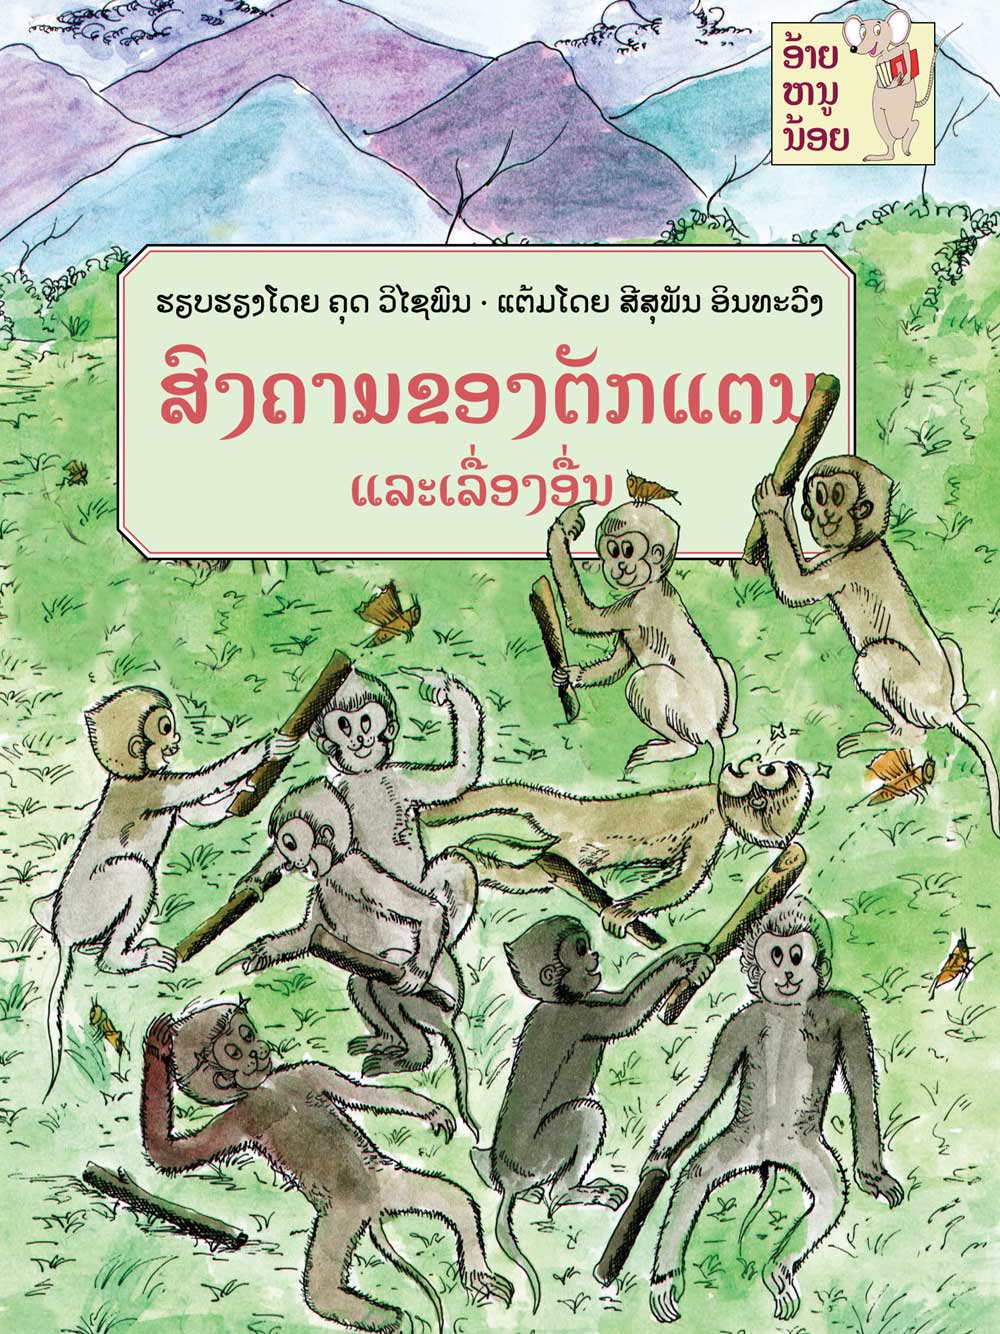 The Grasshopper War large book cover, published in Lao language